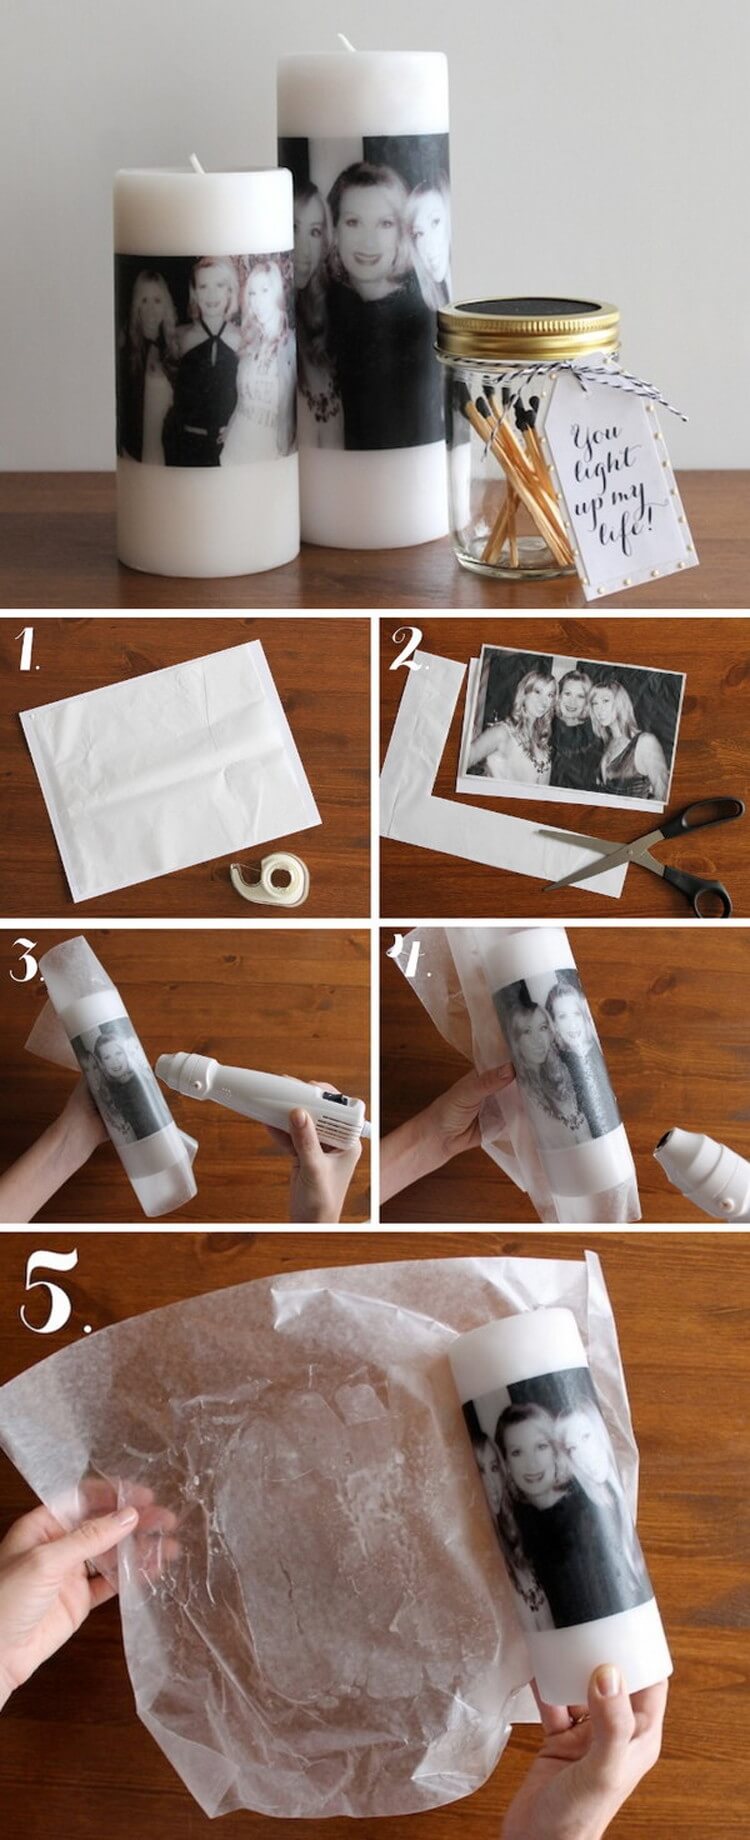 Decorating with Photo Worthy Memories